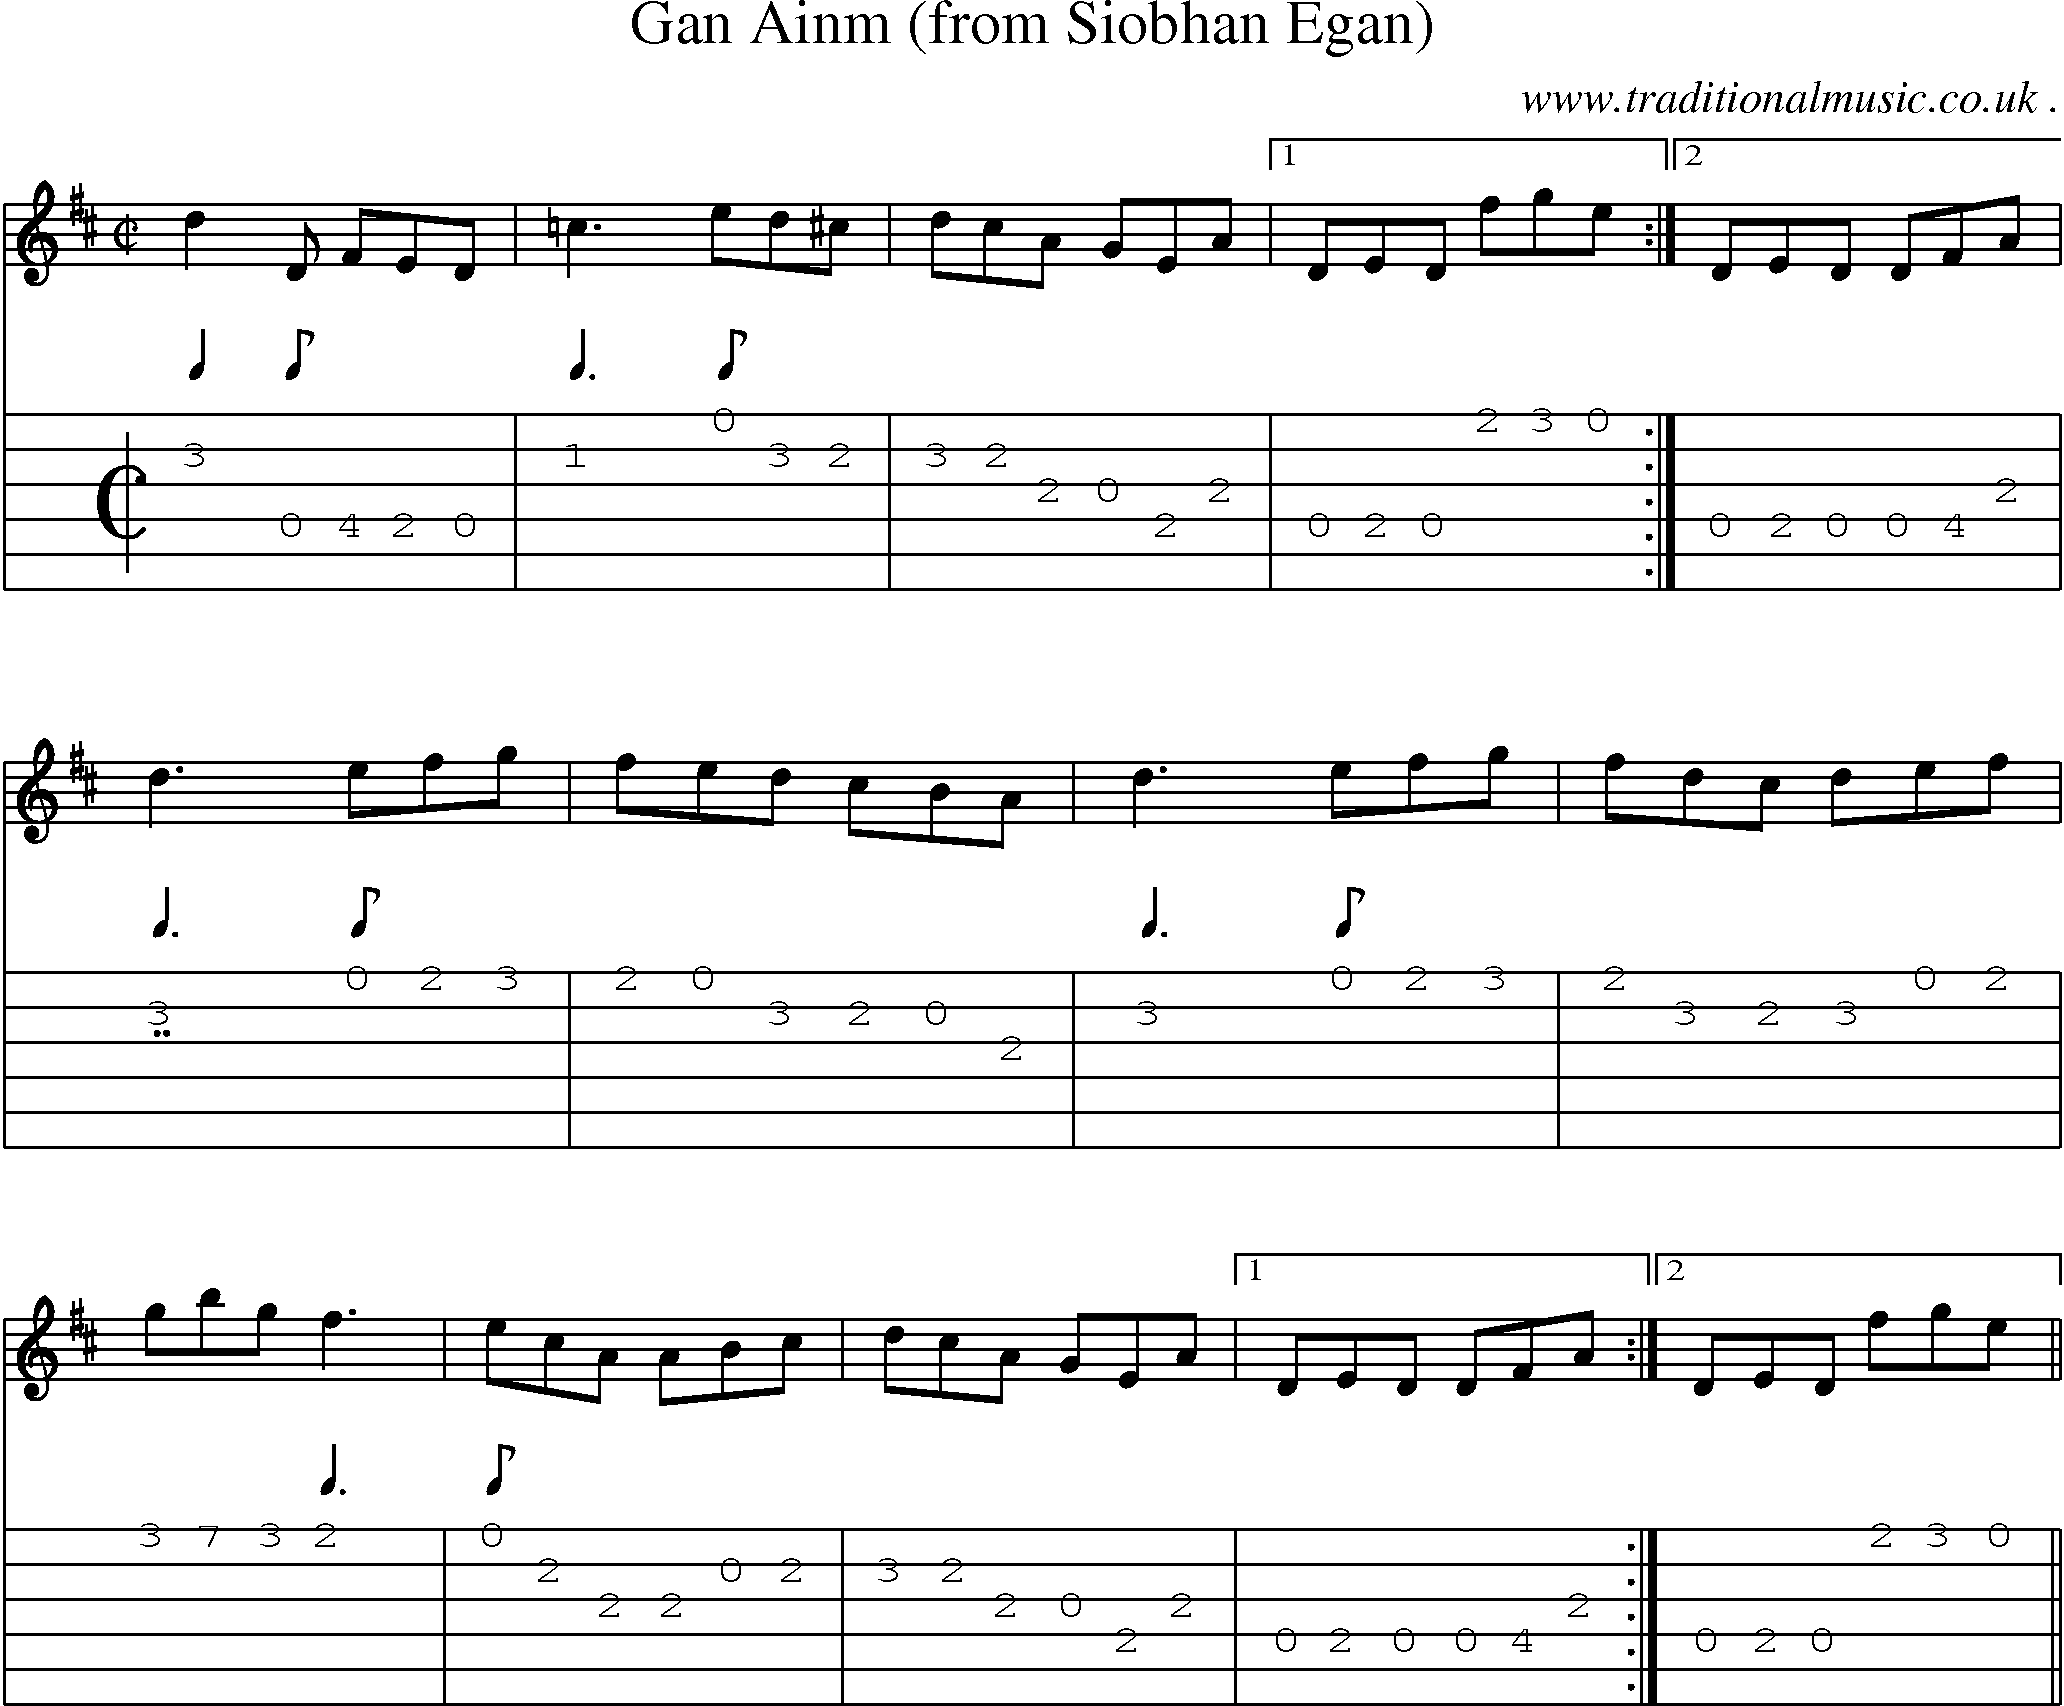 Sheet-Music and Guitar Tabs for Gan Ainm (from Siobhan Egan)